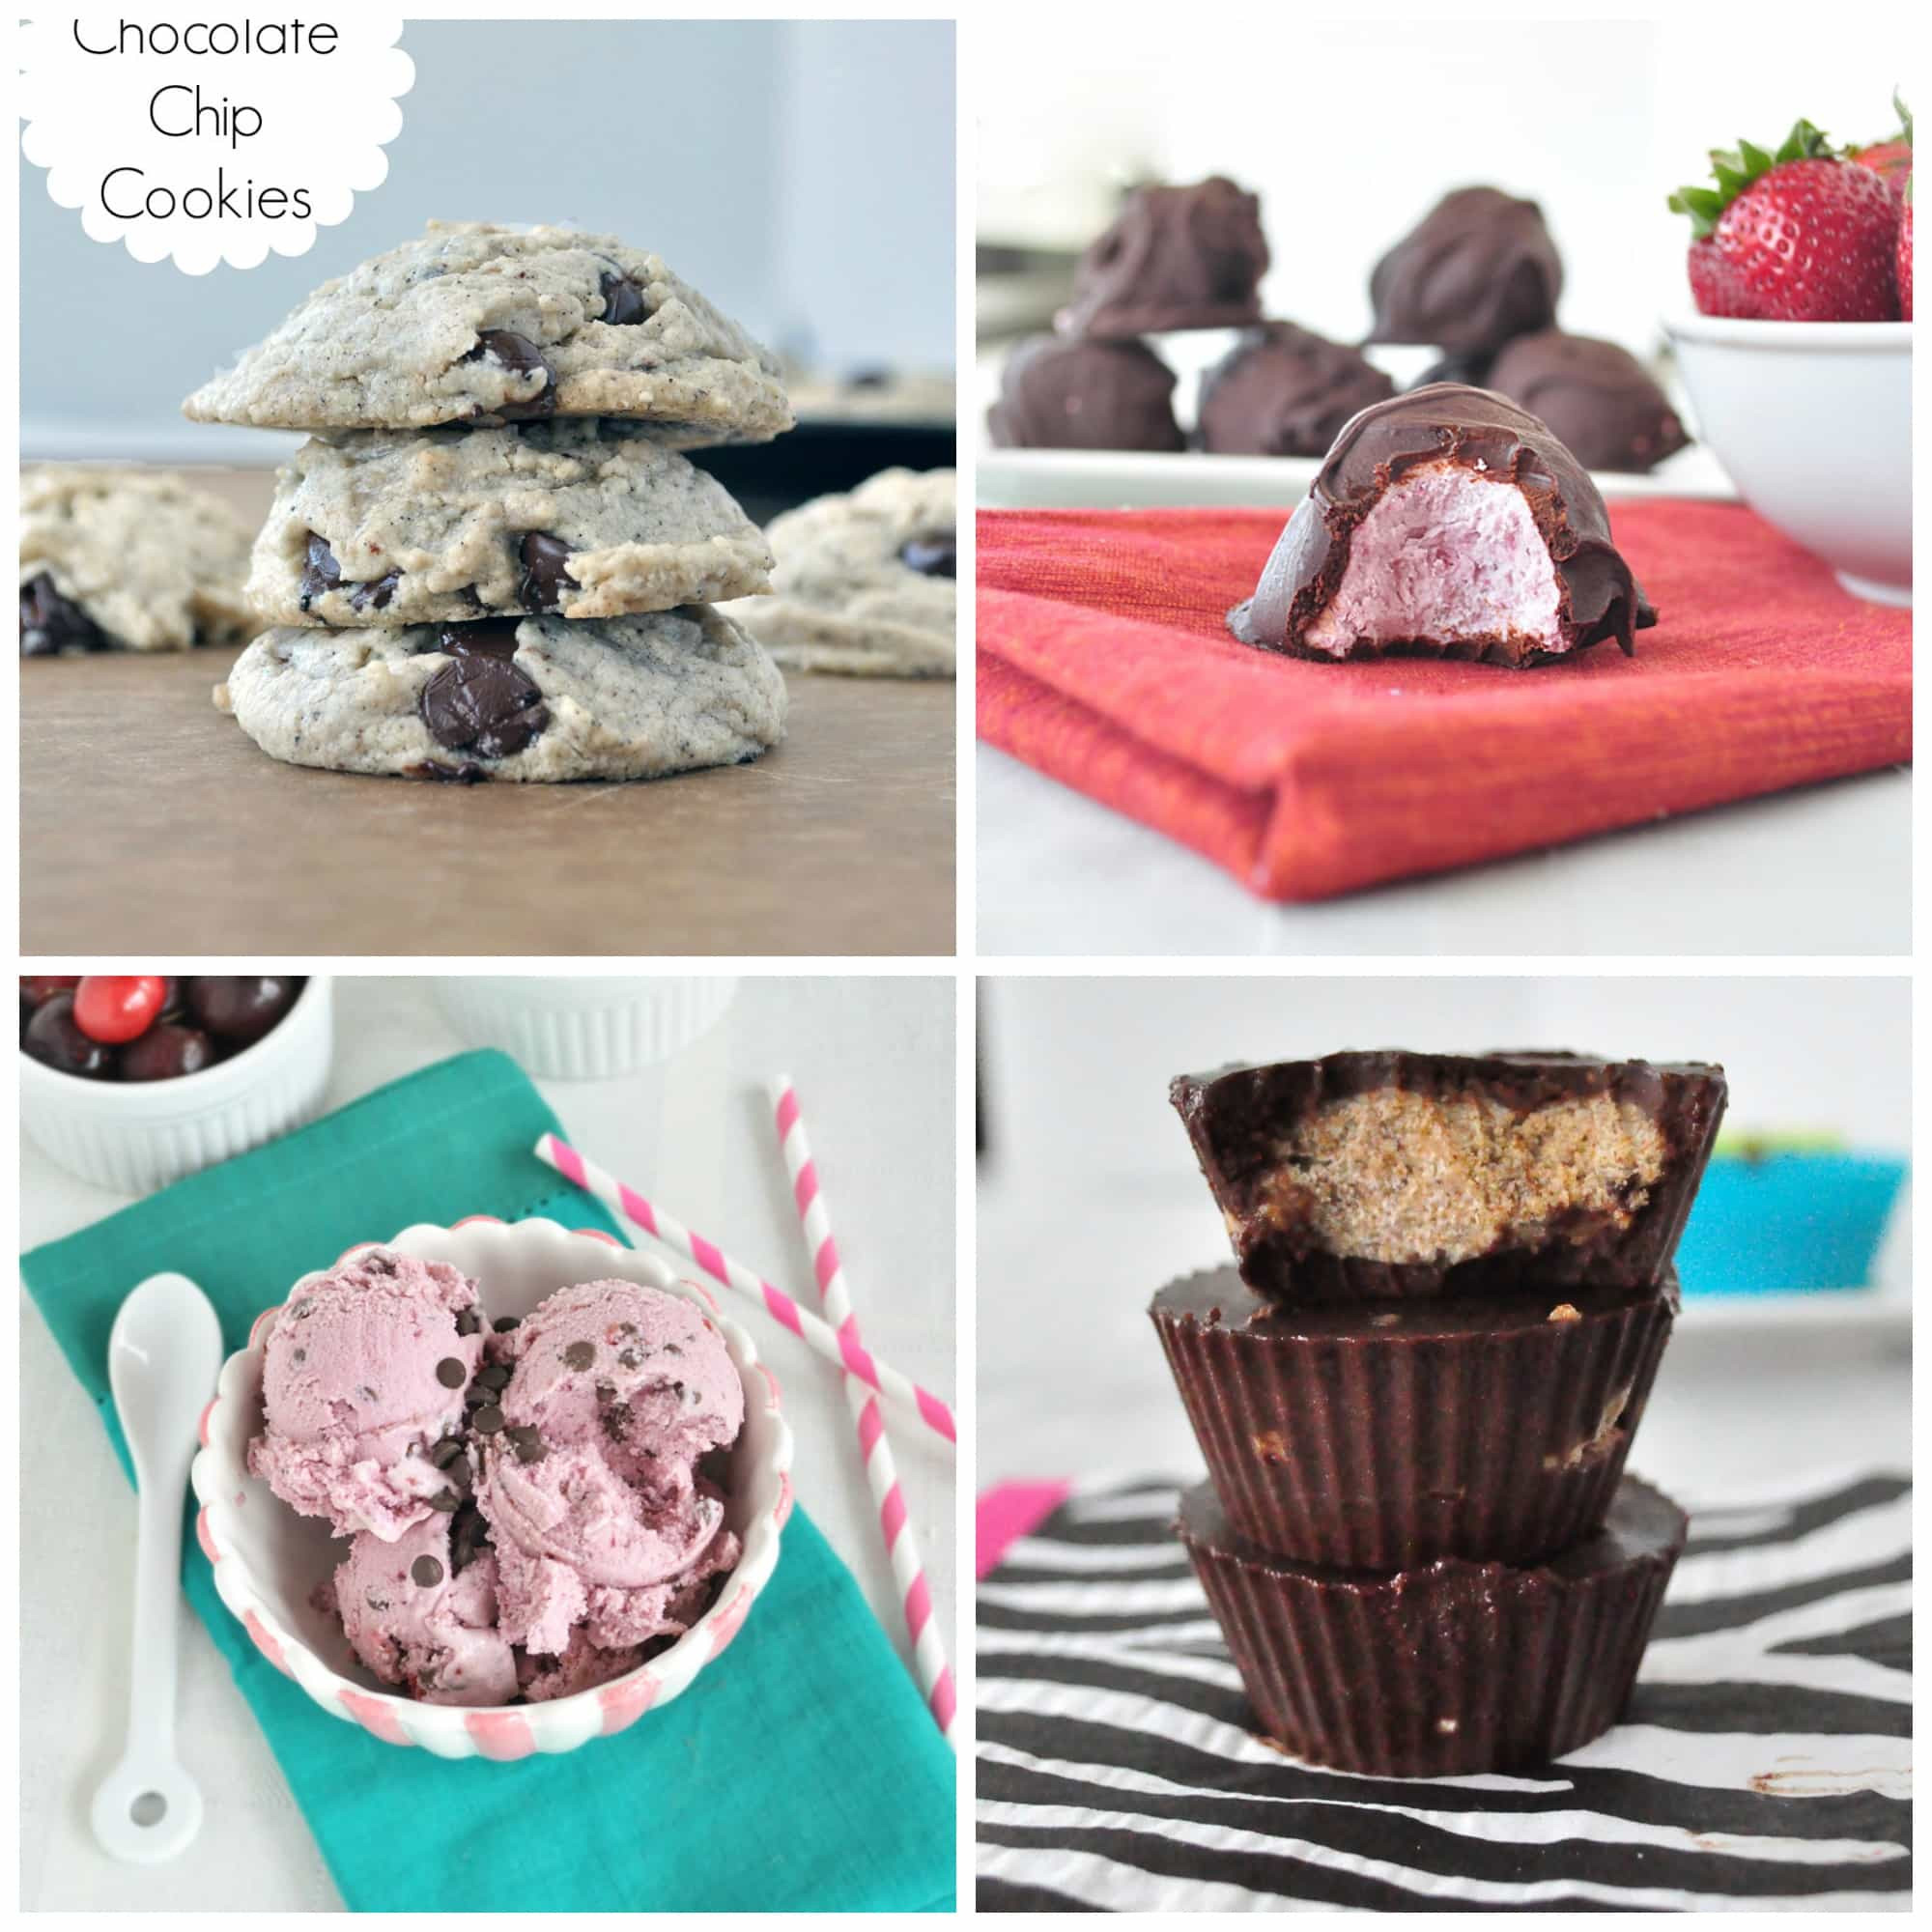 Healthy Dessert Recipies
 20 Healthy Dessert Recipes with 5 Ingre nts or Less My